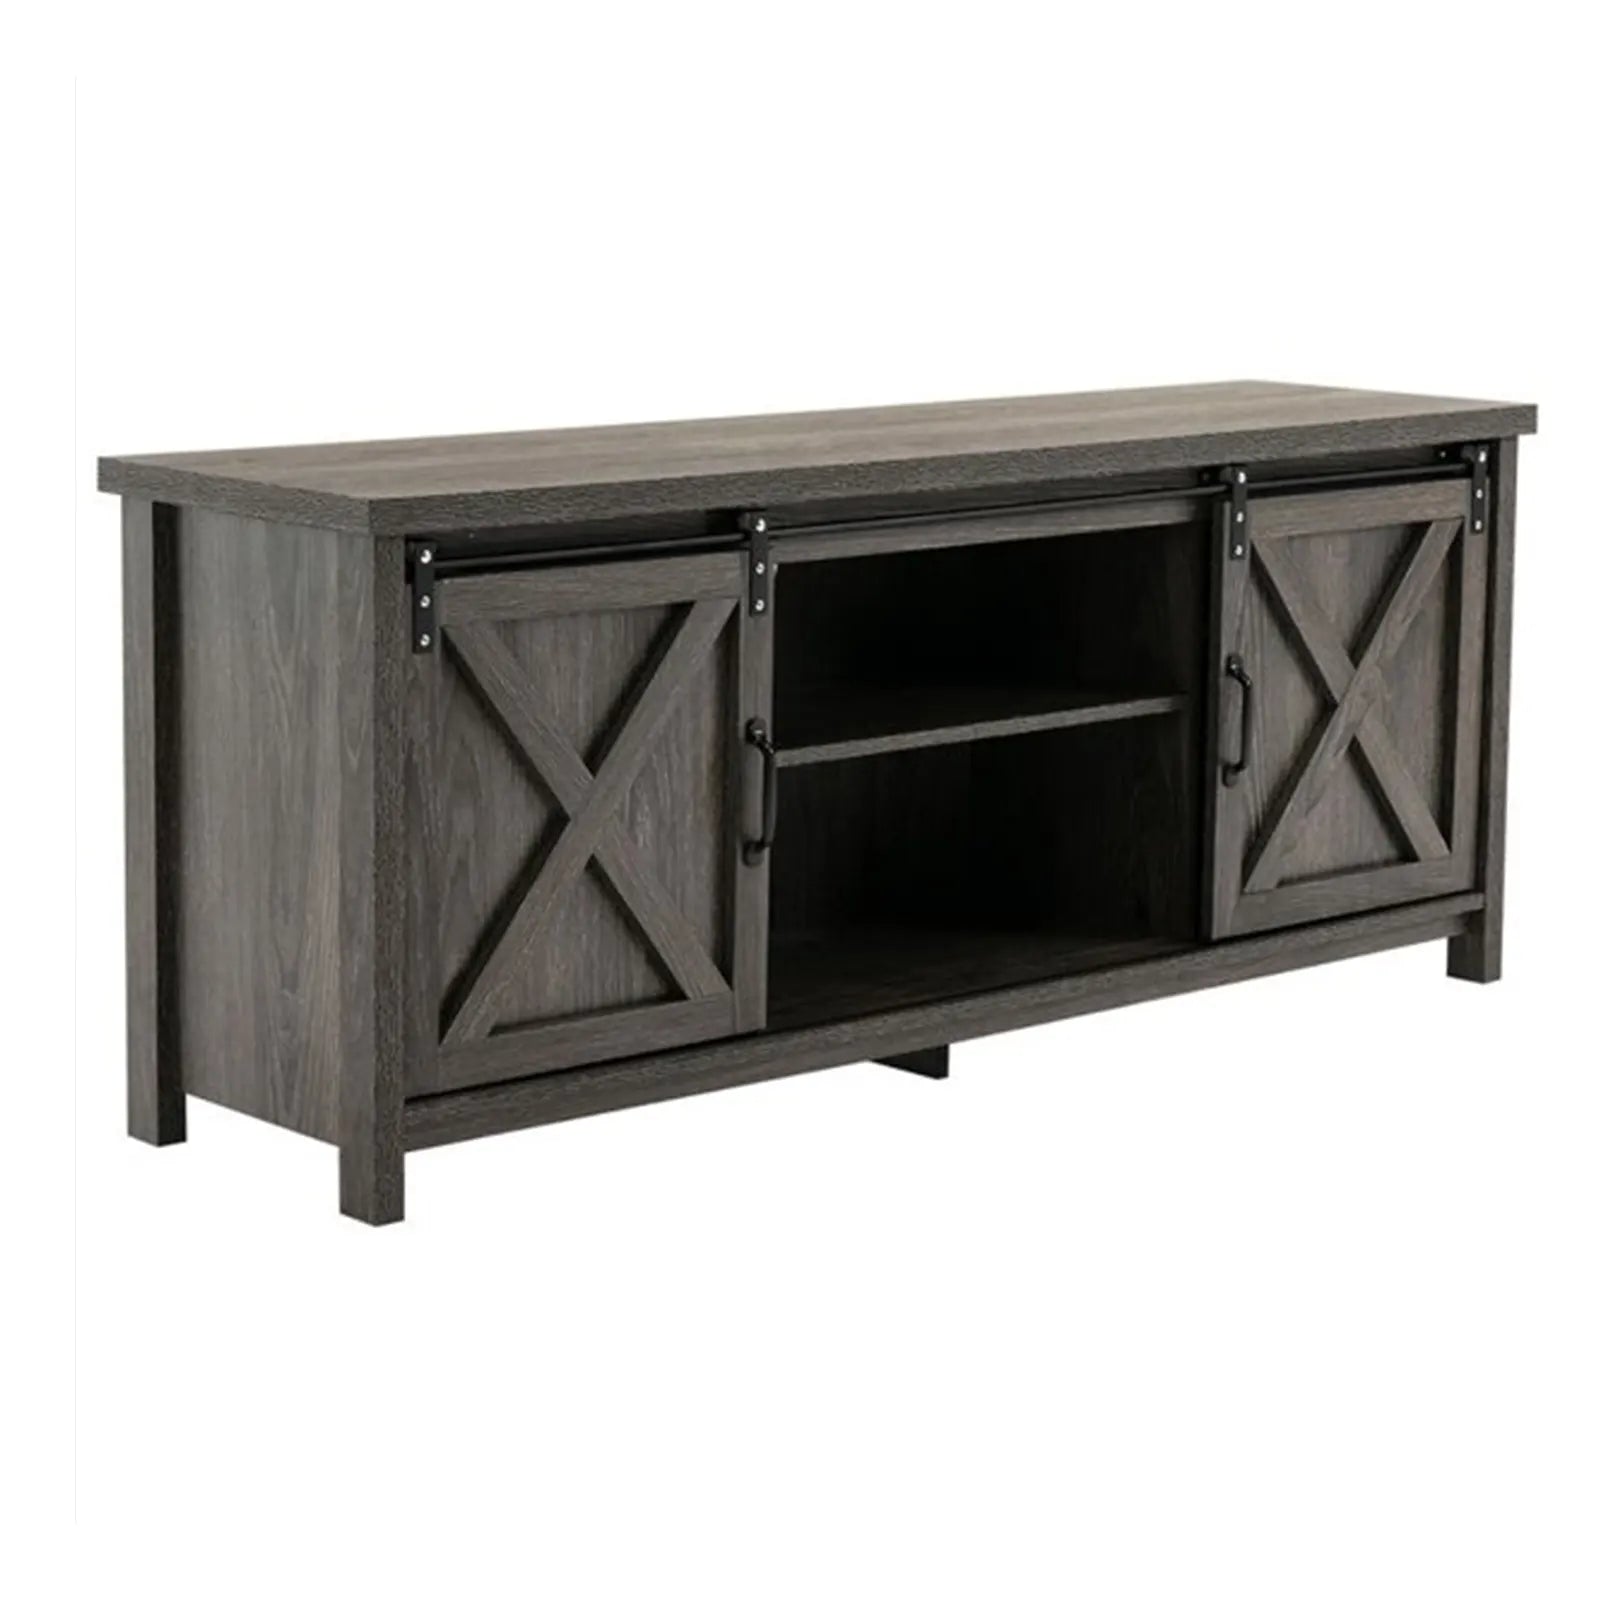 58" Farmhouse Sliding Barn Door TV Stand for TVs Up to 65" Television Cabinet